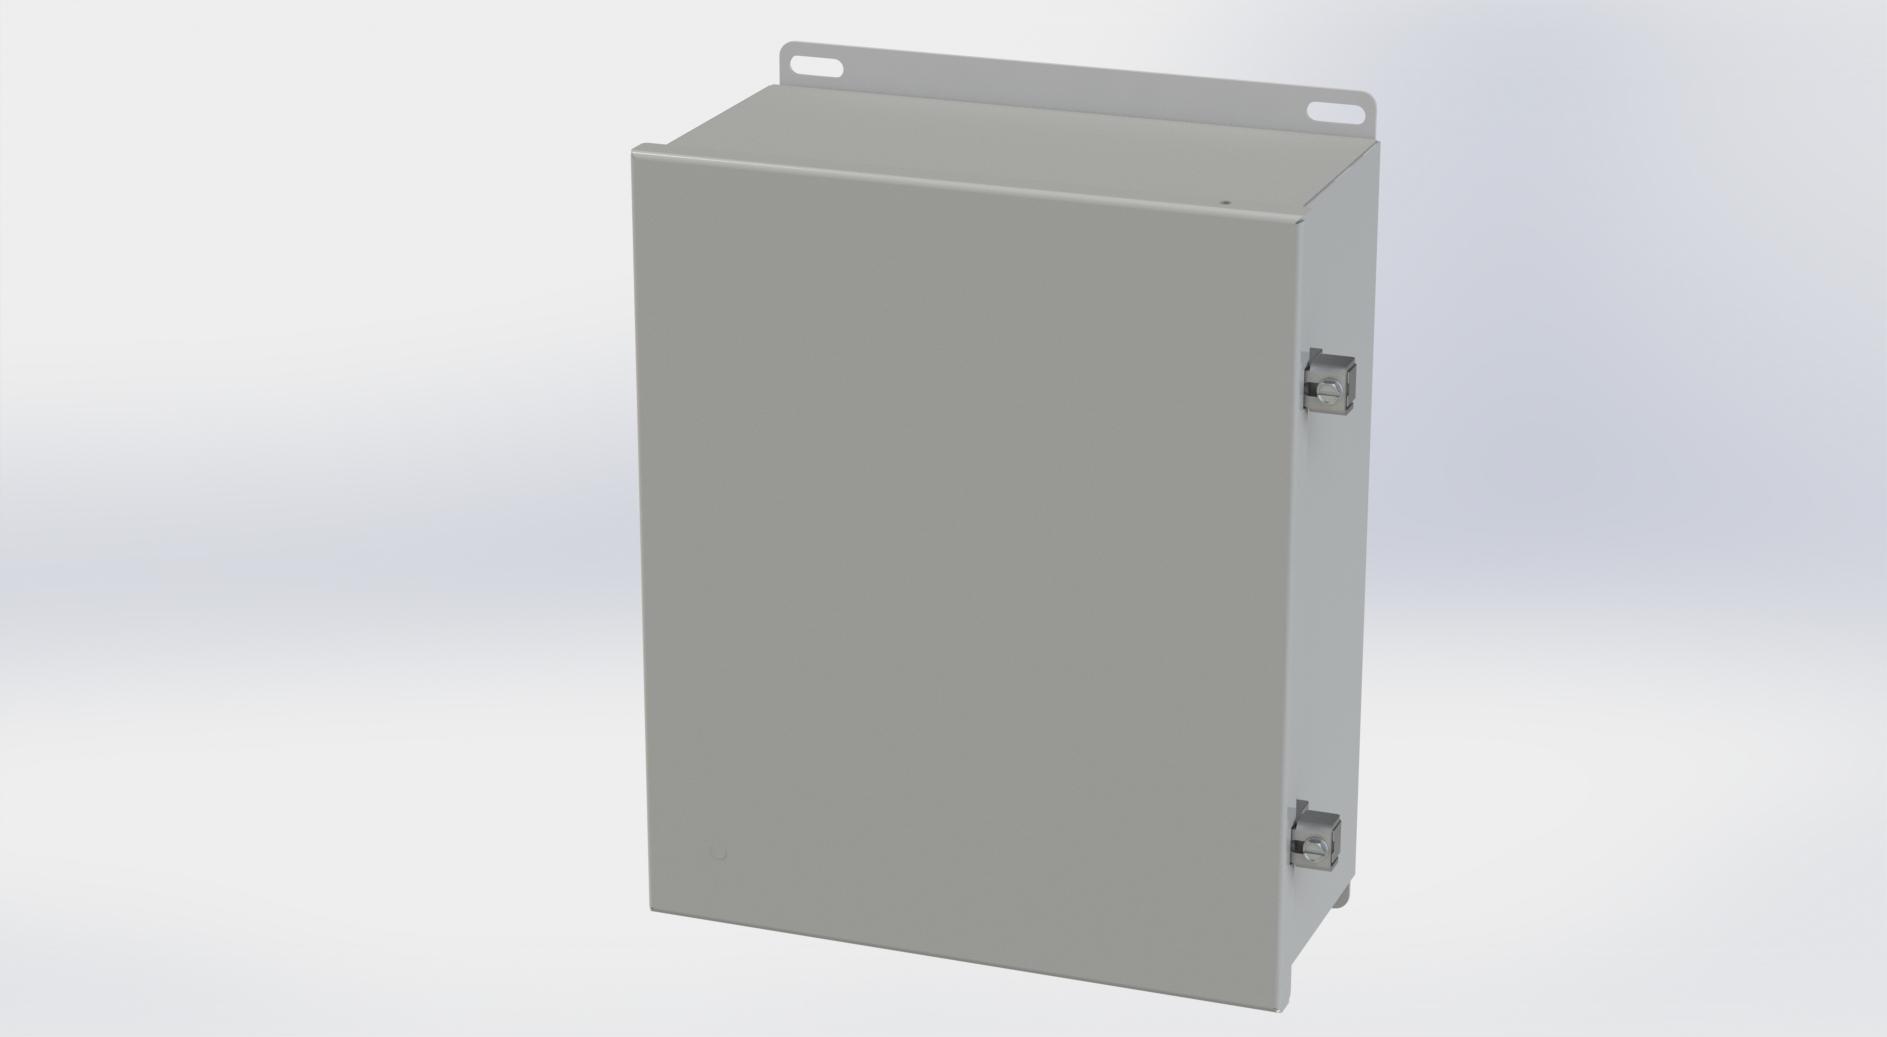 Saginaw Control SCE-1210CHNF CHNF Enclosure, Height:12.13", Width:10.00", Depth:5.00", ANSI-61 gray powder coating inside and out. Optional sub-panels are powder coated white.